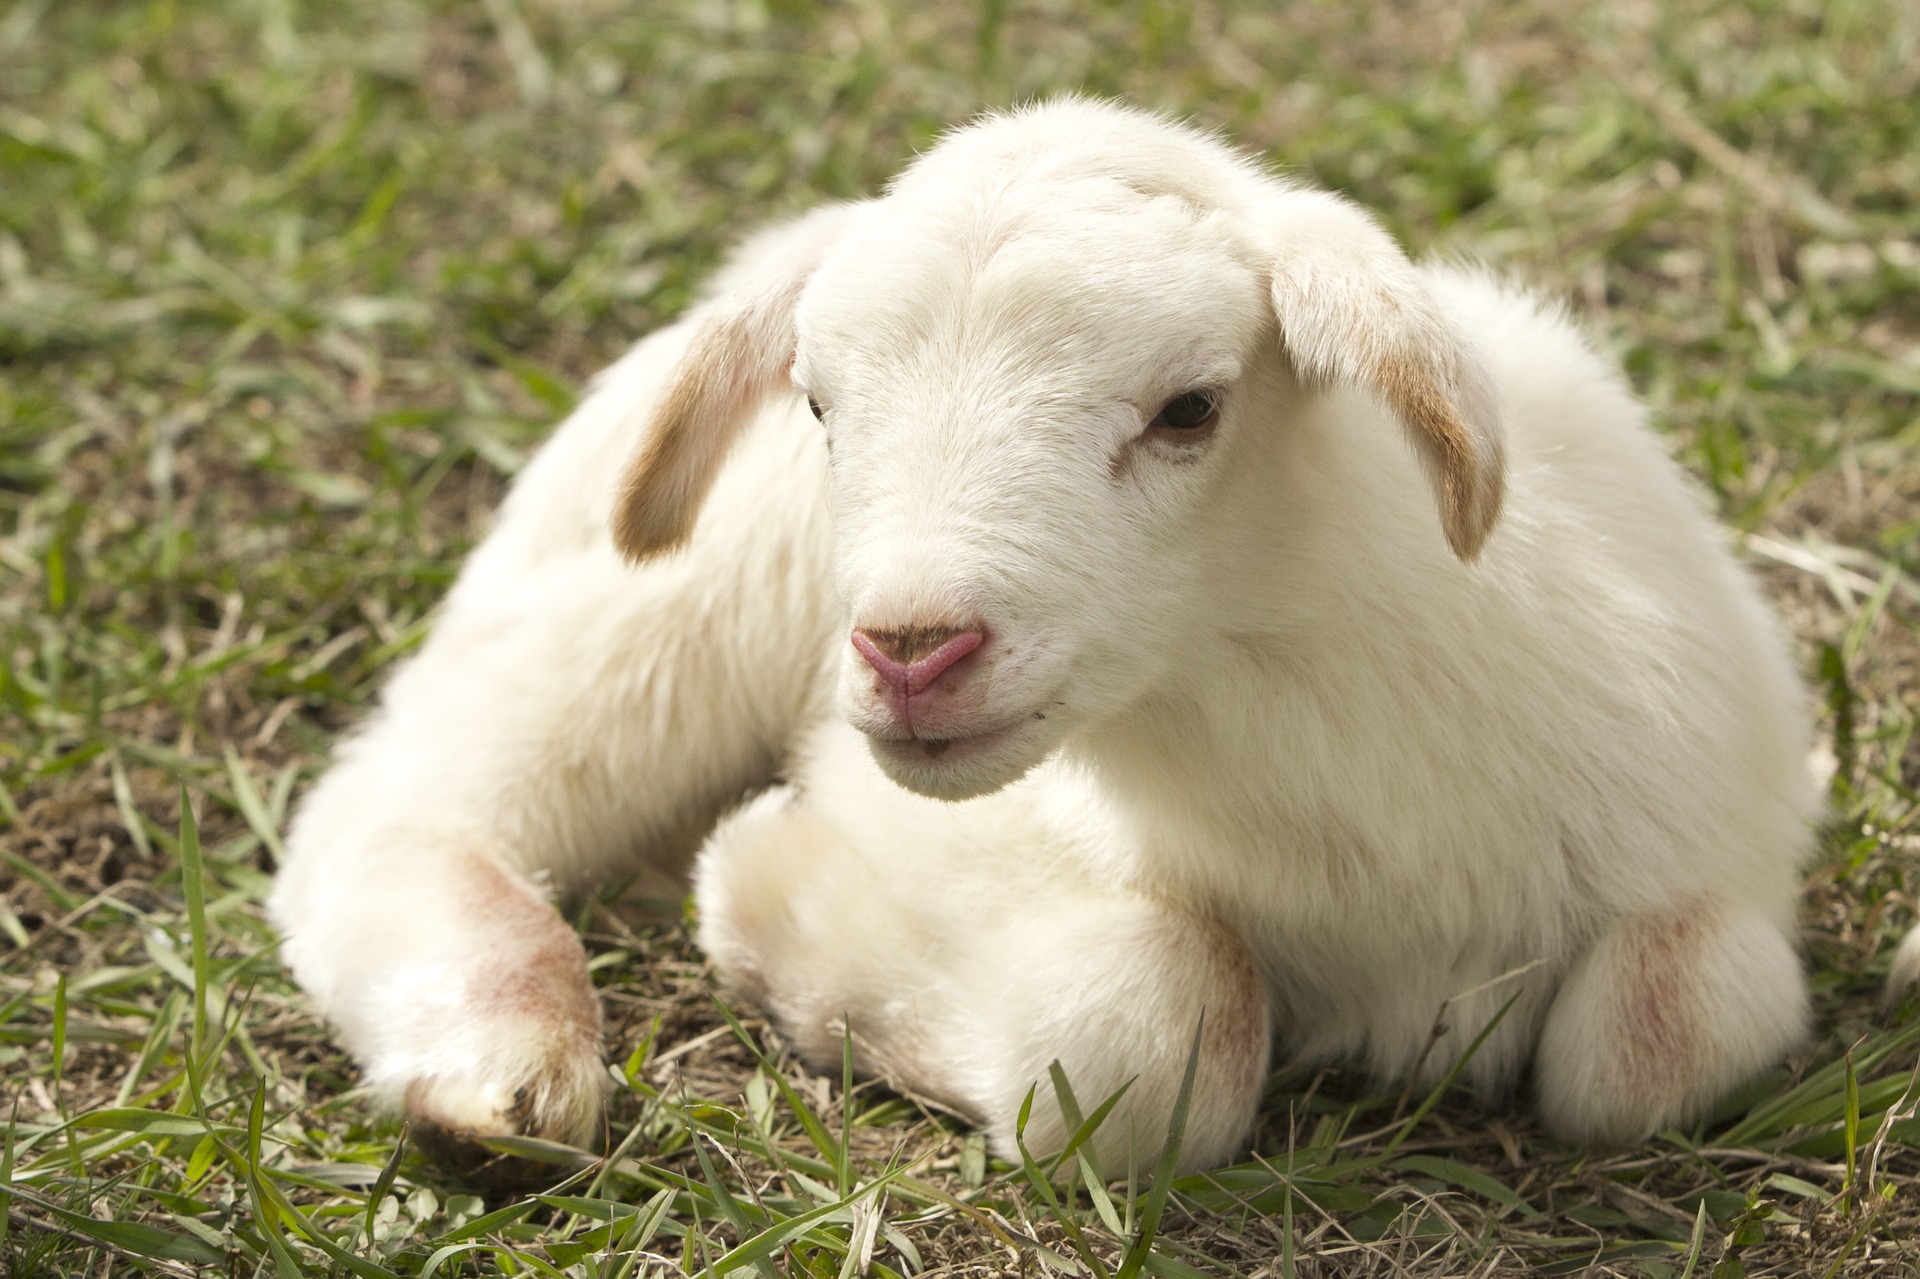 What is a baby sheep called? - Old Luke's Farm